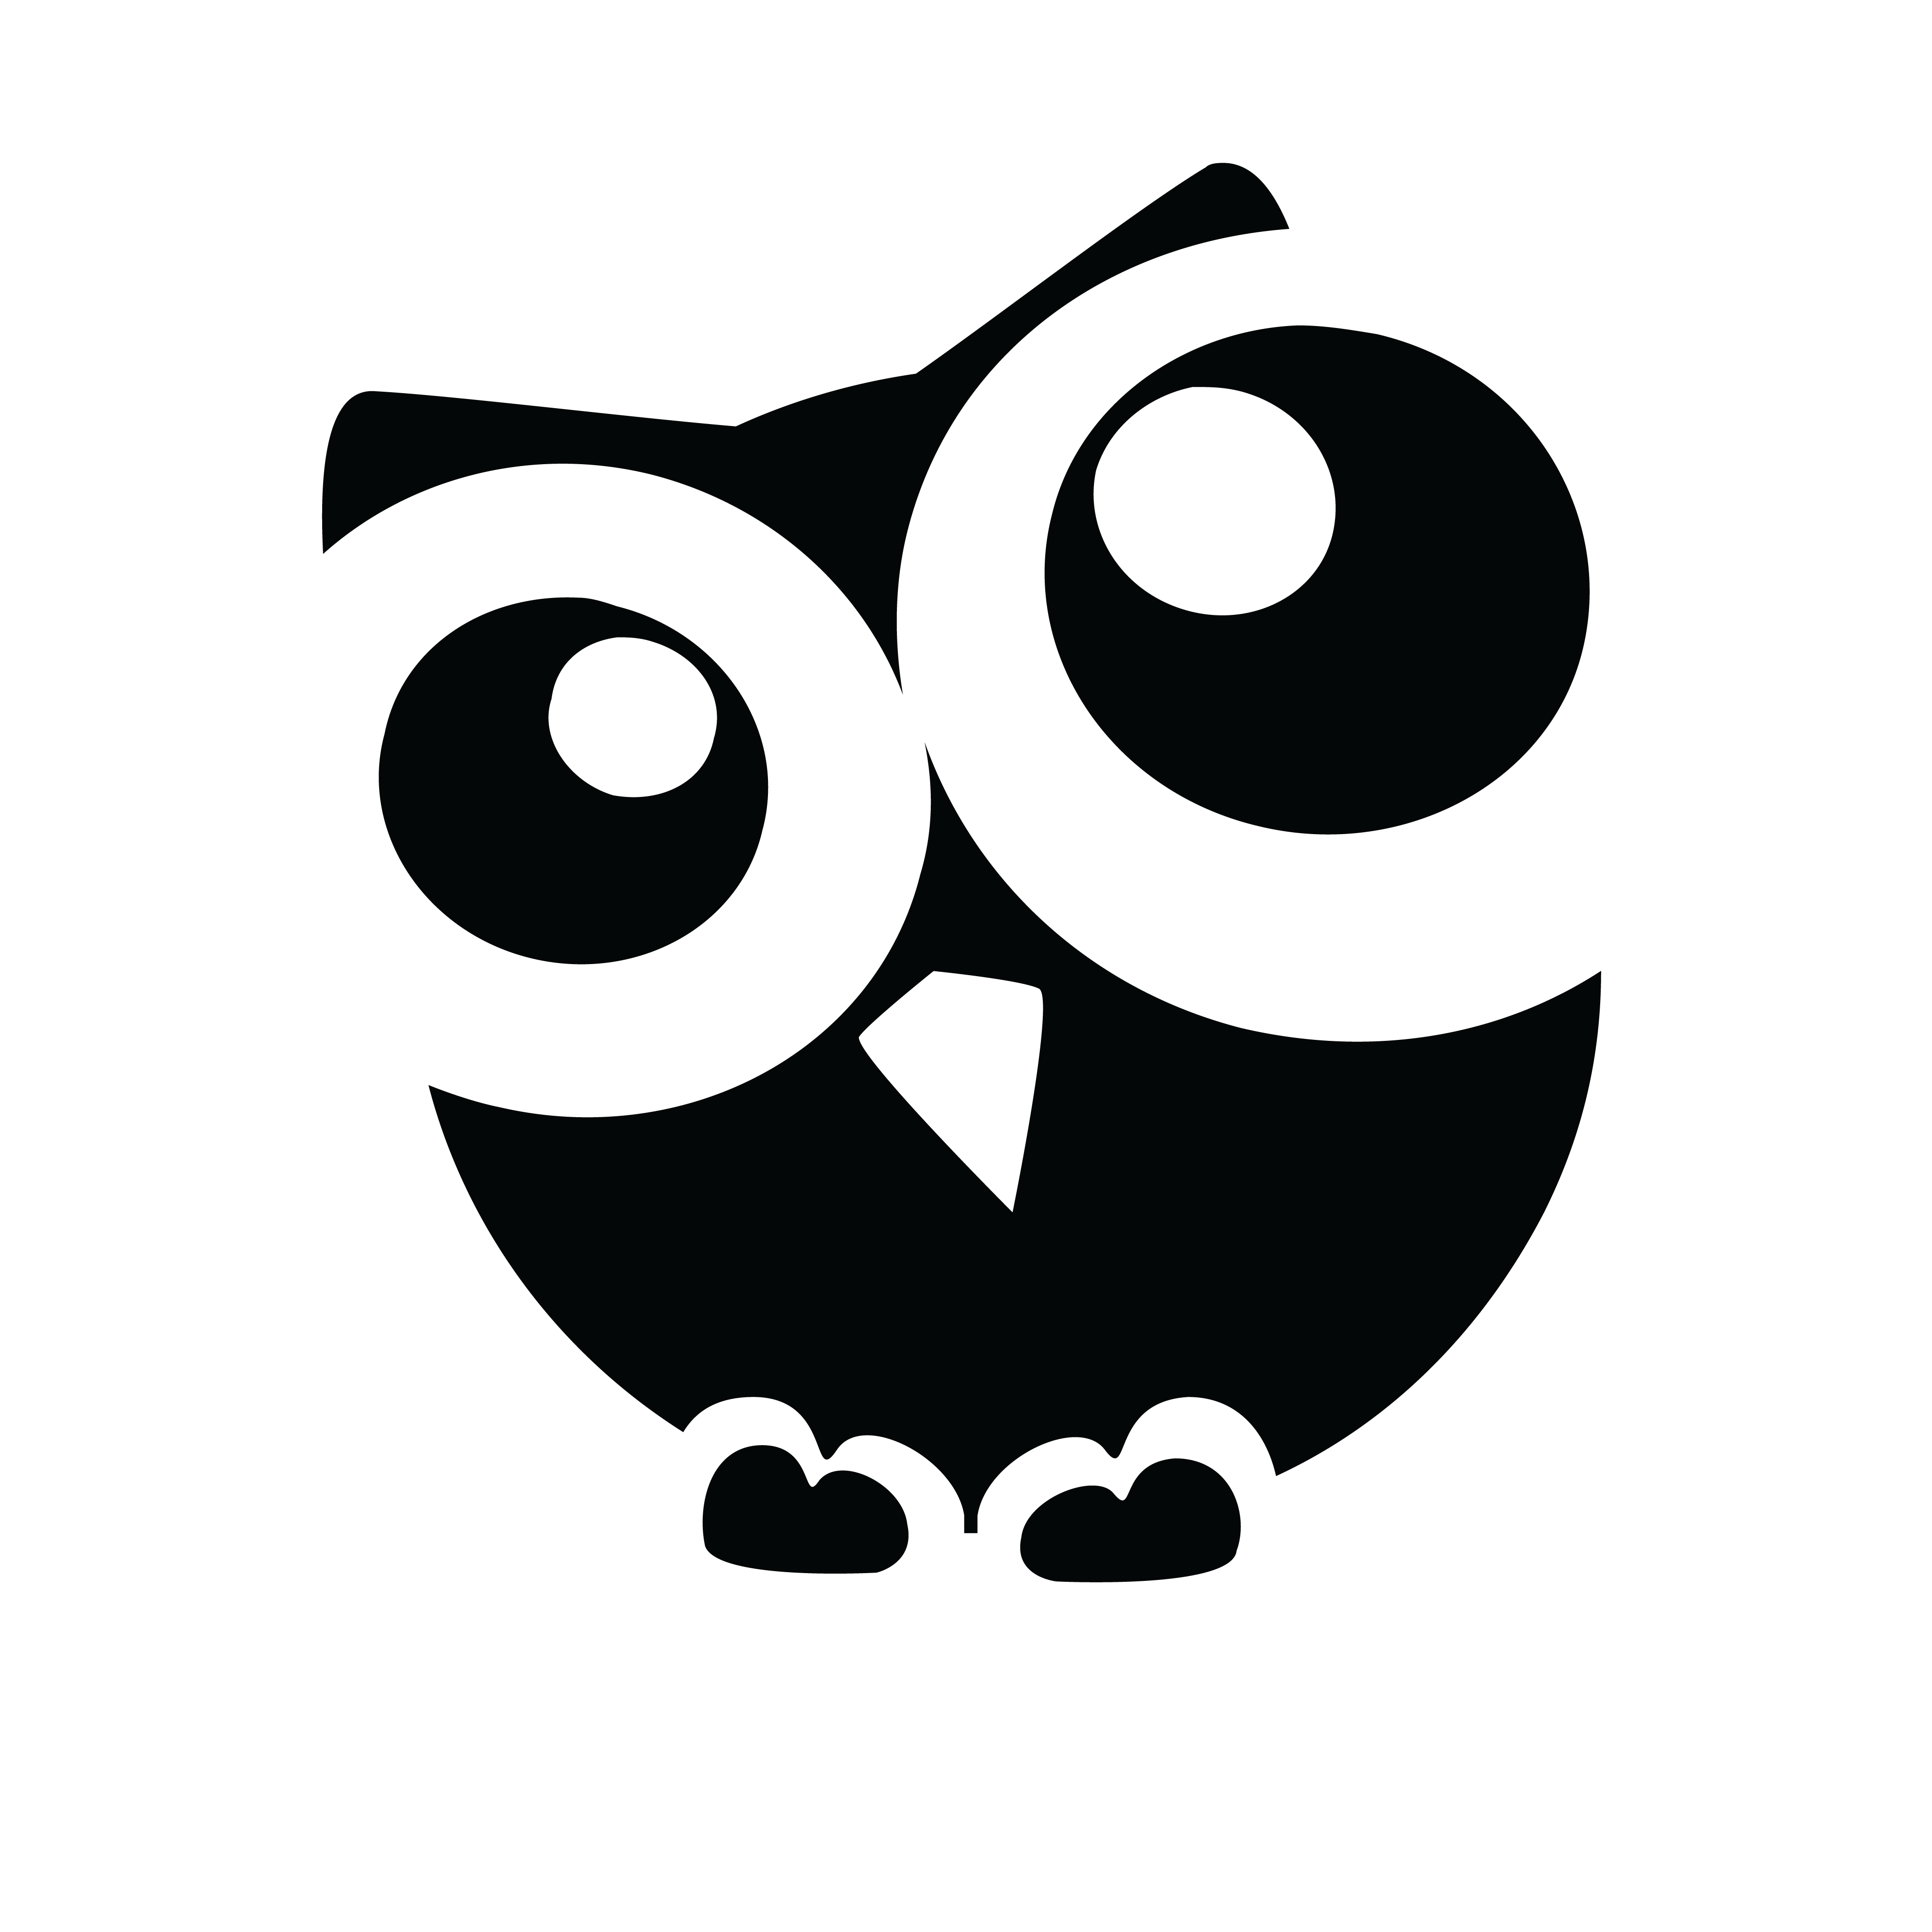 Black and White Owl Logo - 439 Free Clipart Of A Curious Owl Black White Clip Art And ...